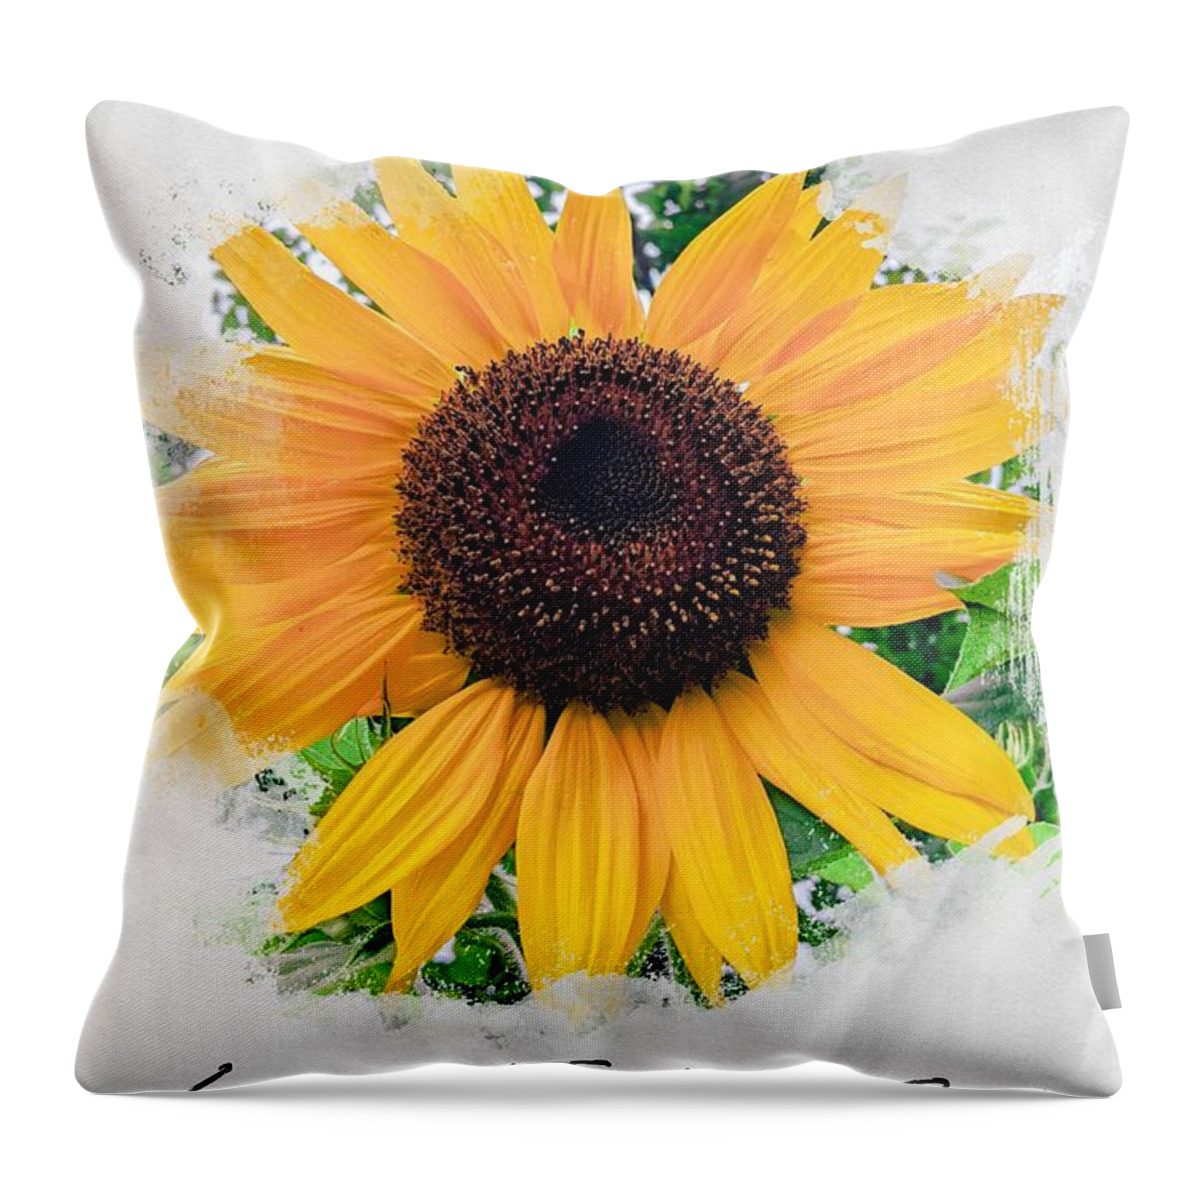 Sunflower Throw Pillow featuring the photograph Keep Your Face To The Sunshine by Claudia Zahnd-Prezioso